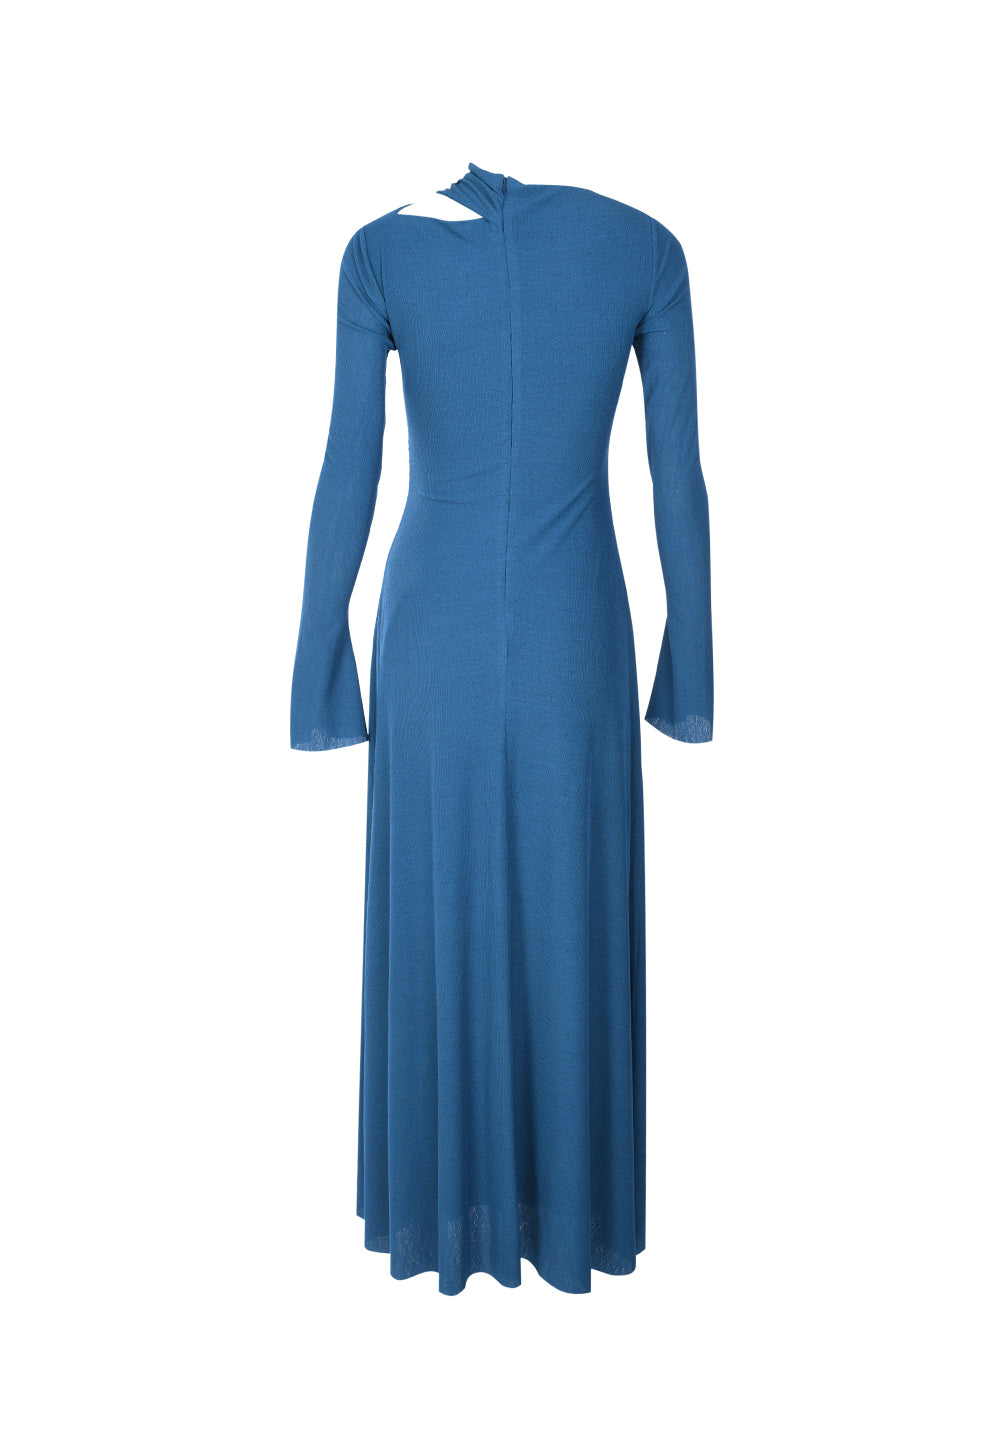 MAXI DRESS WITH SHOULDER CUT-OUTS AND METALLIC BUTTONS